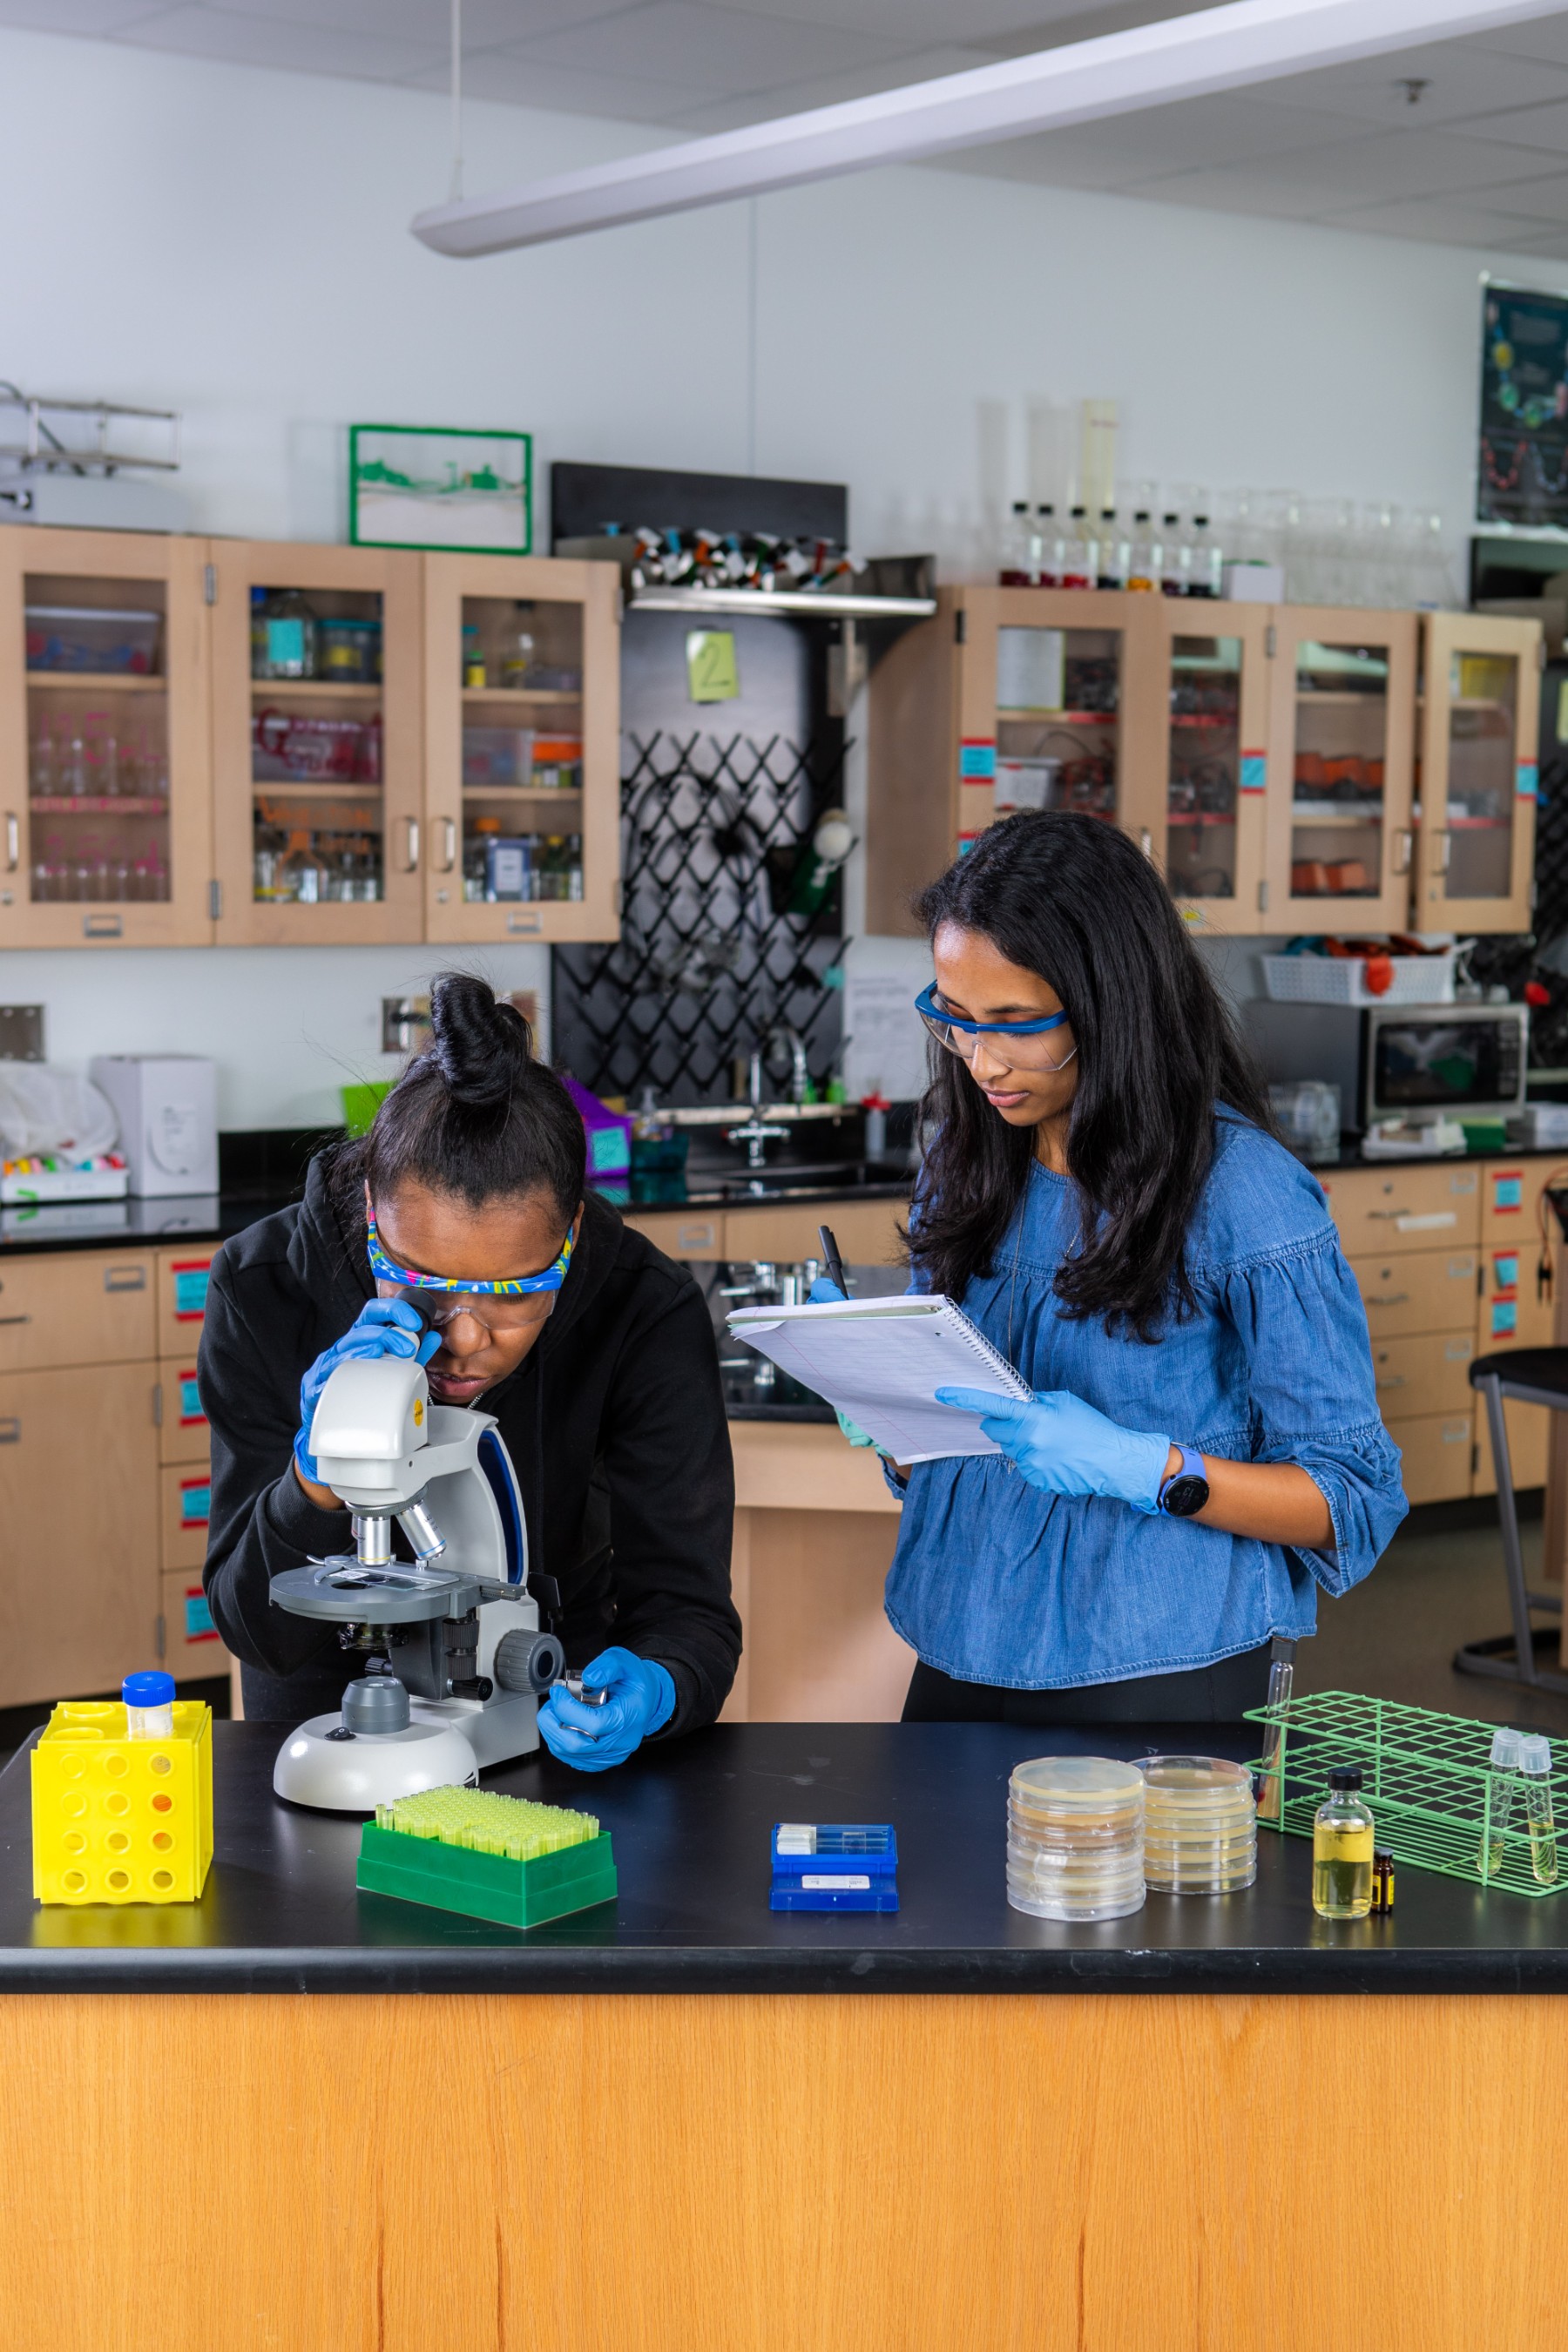 LabXchange brings the experience of working and learning science in a lab straight to students. Through virtual lab experiments, high-quality videos and online collaboration with others in the global science community, students can experience the scientific process for themselves.